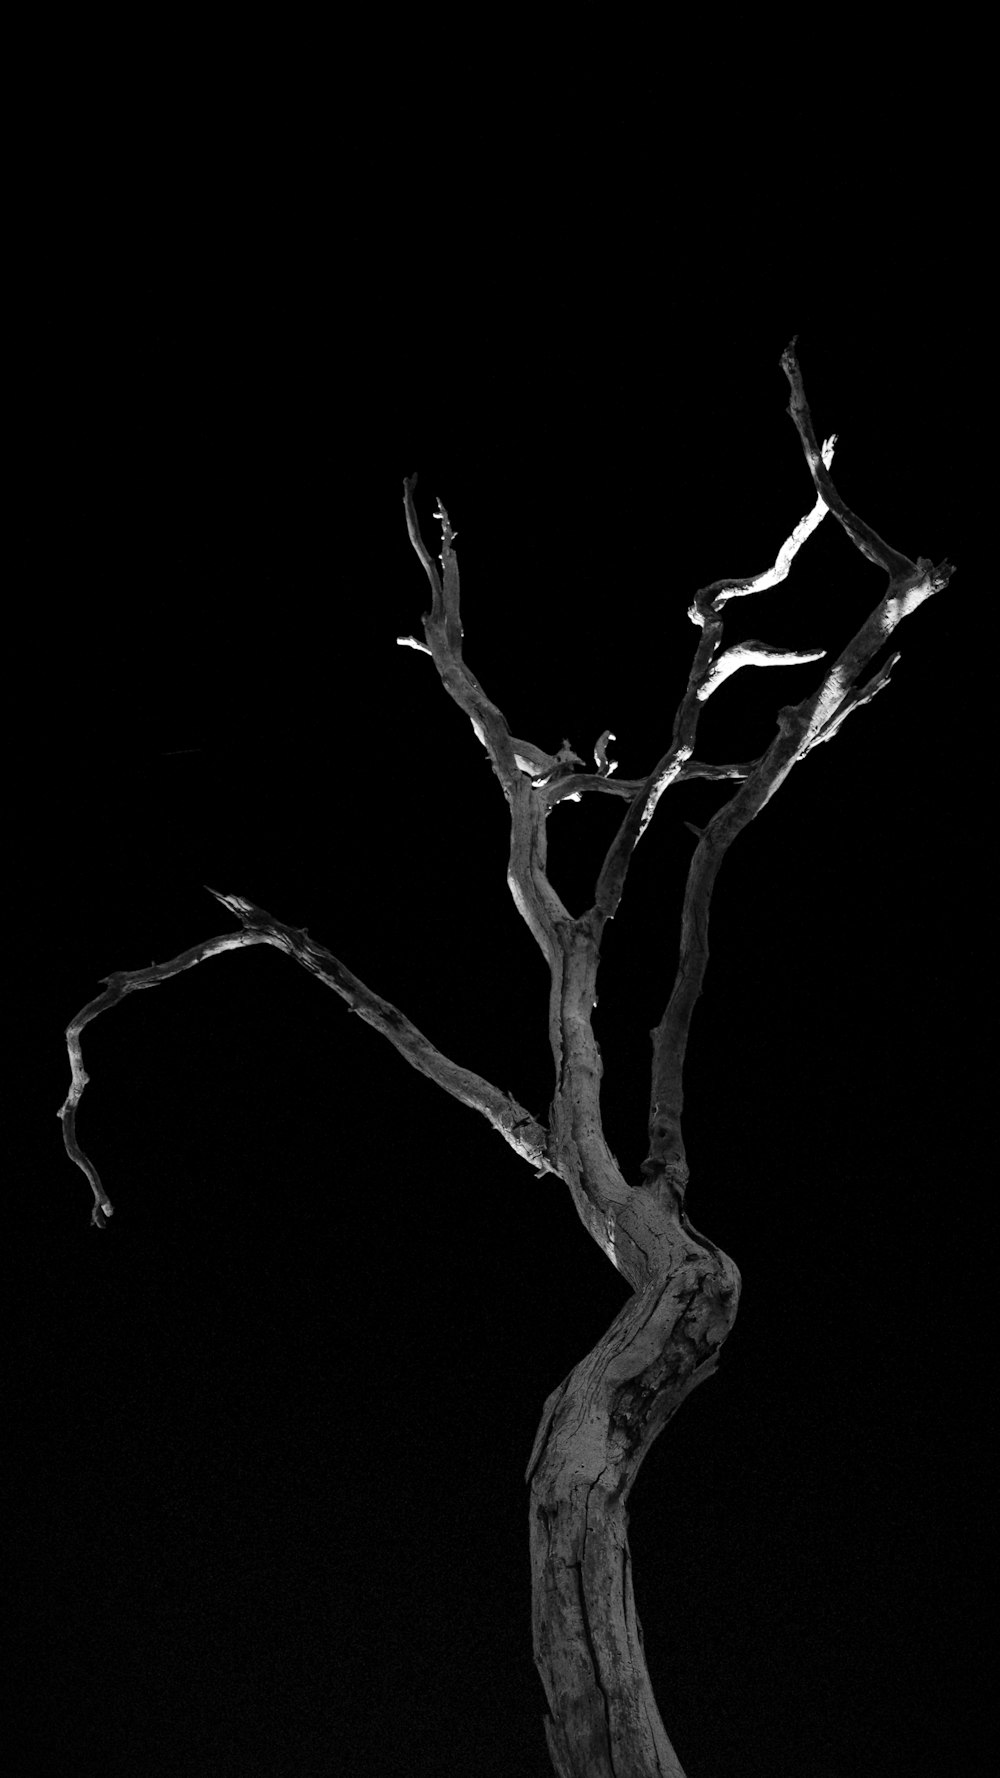 a black and white photo of a bare tree